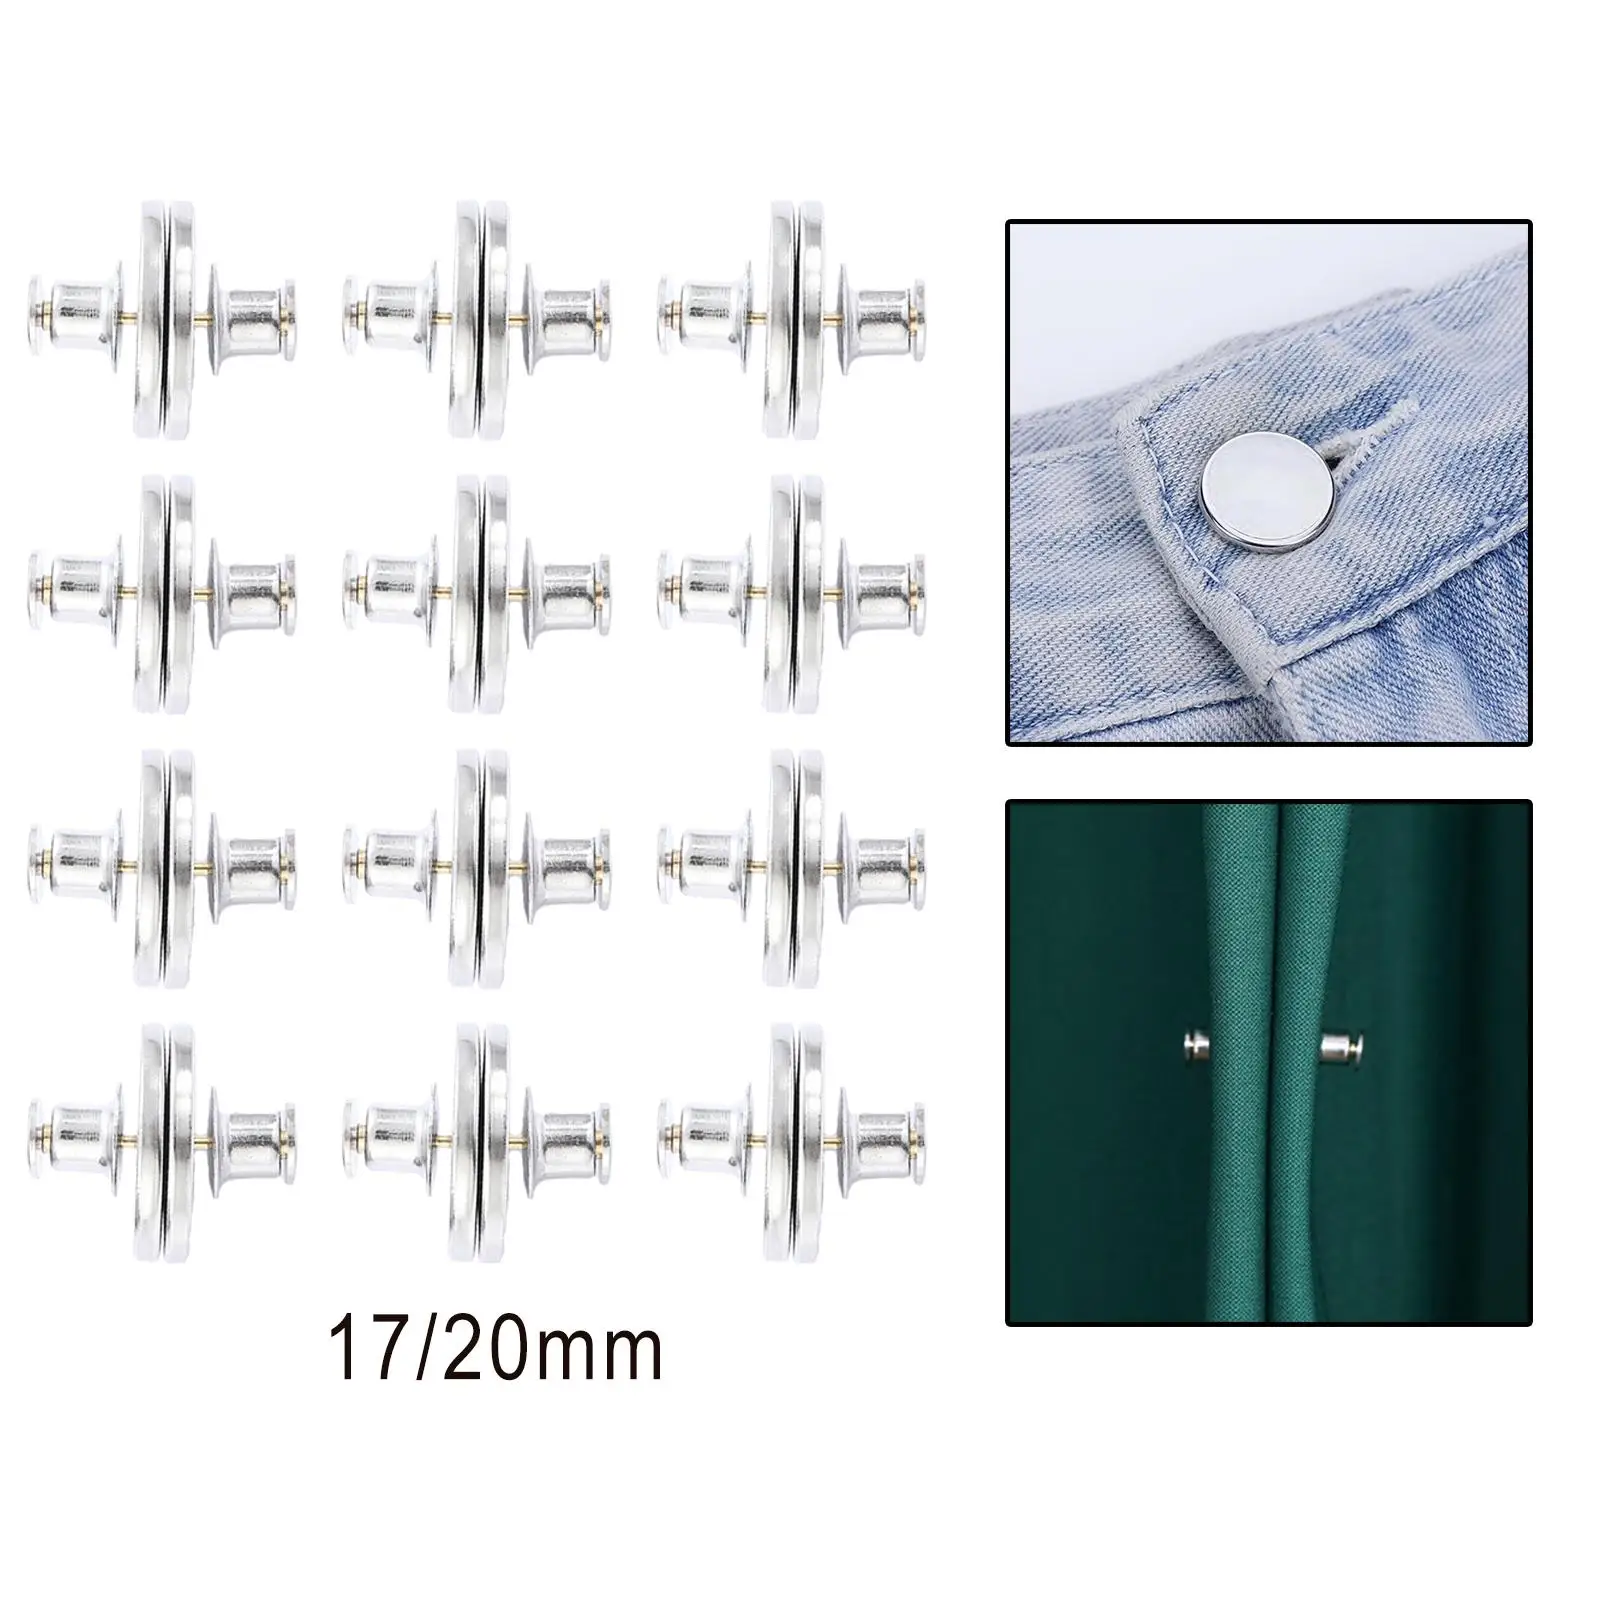 6 Pair Curtain Magnetic Button Removable No Tool Instant No Sew for Clothing